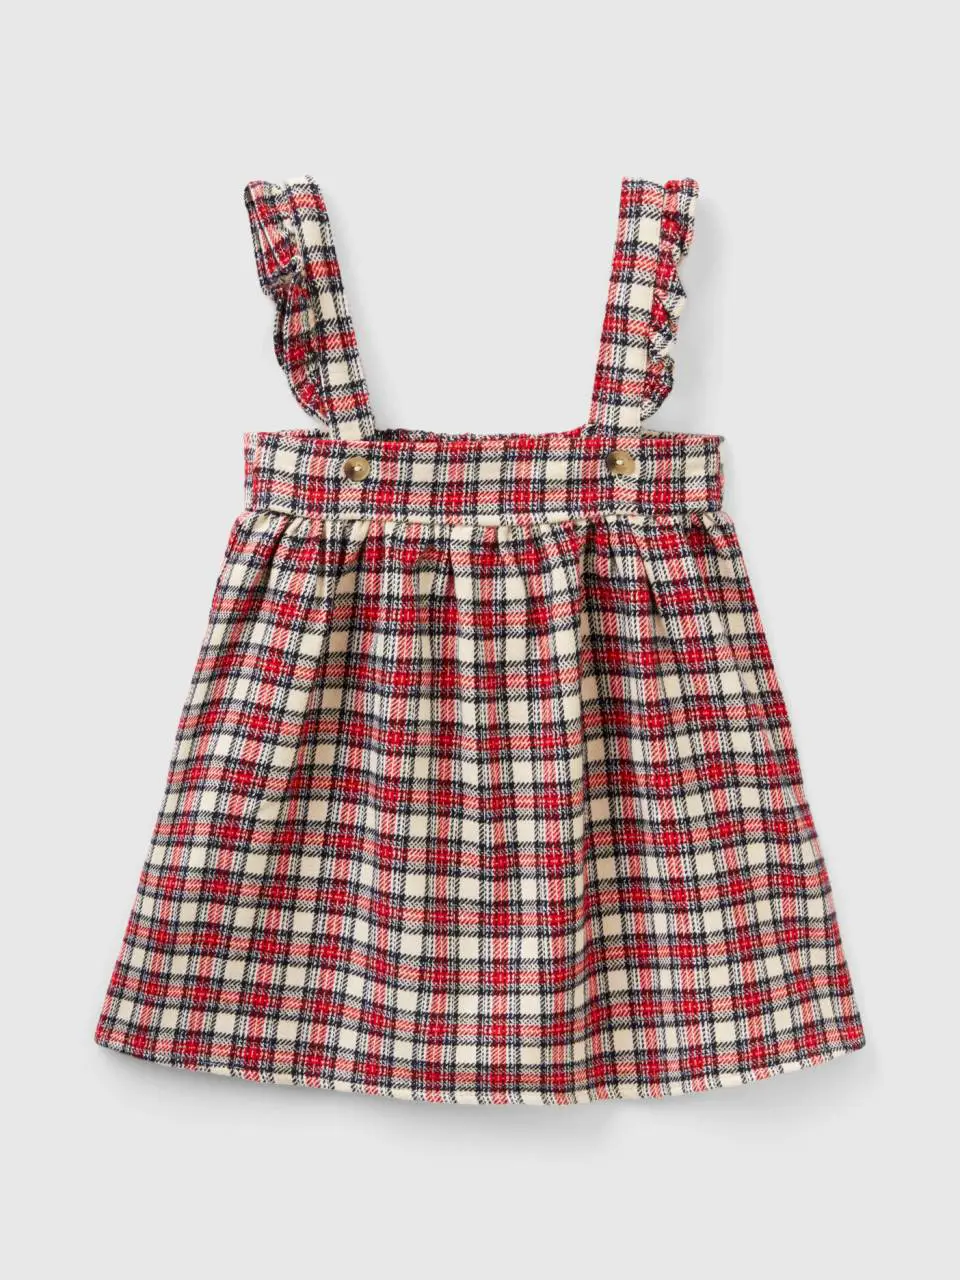 Benetton check dress with rouches. 1